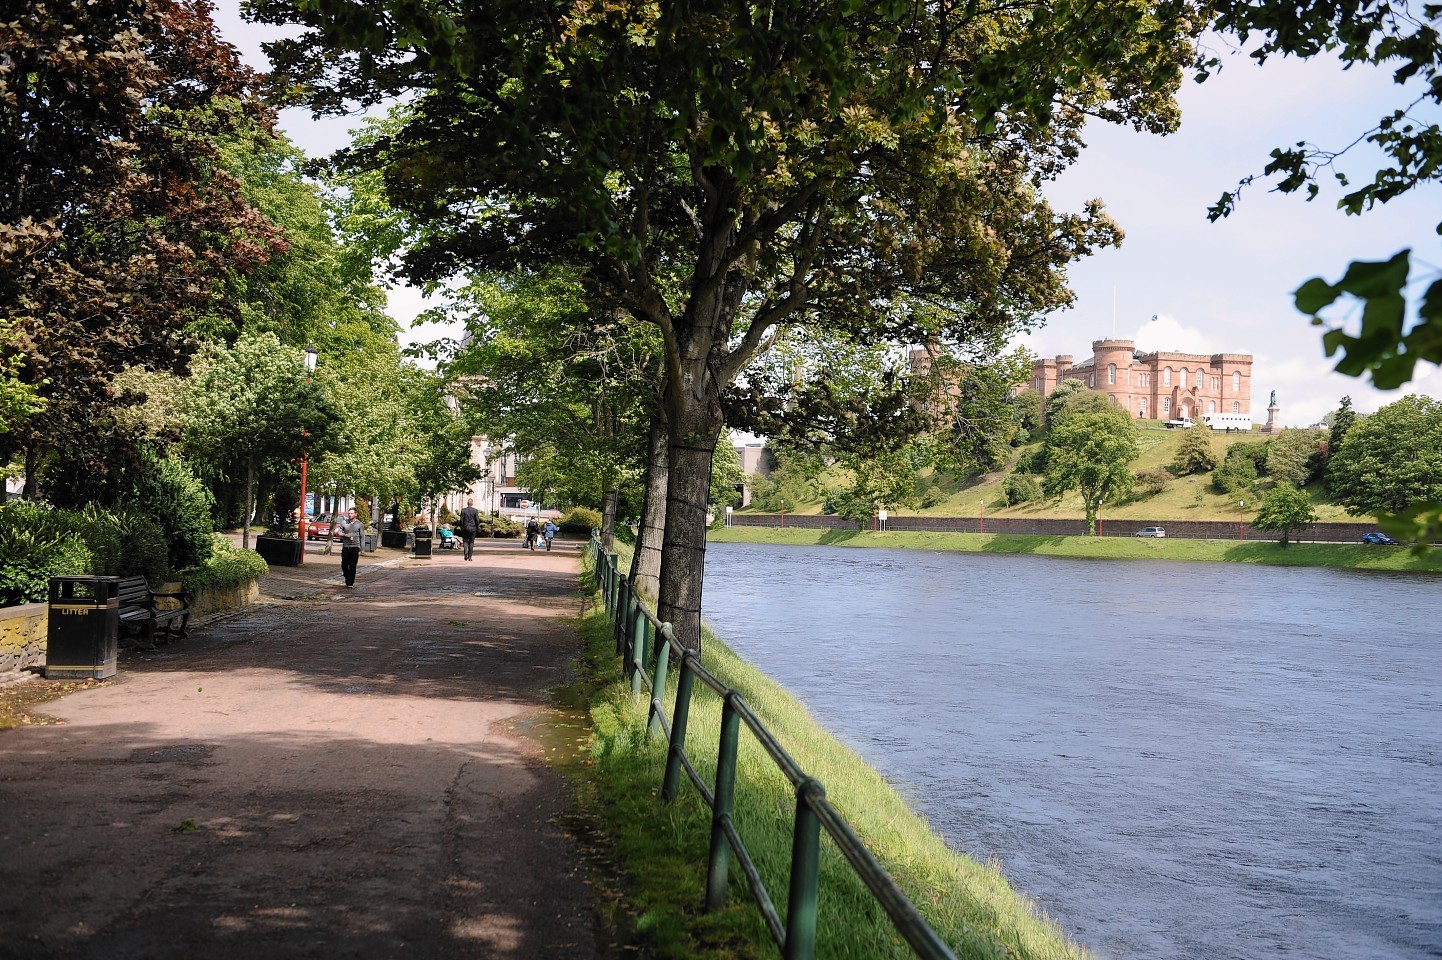 Ness Walk in Inverness